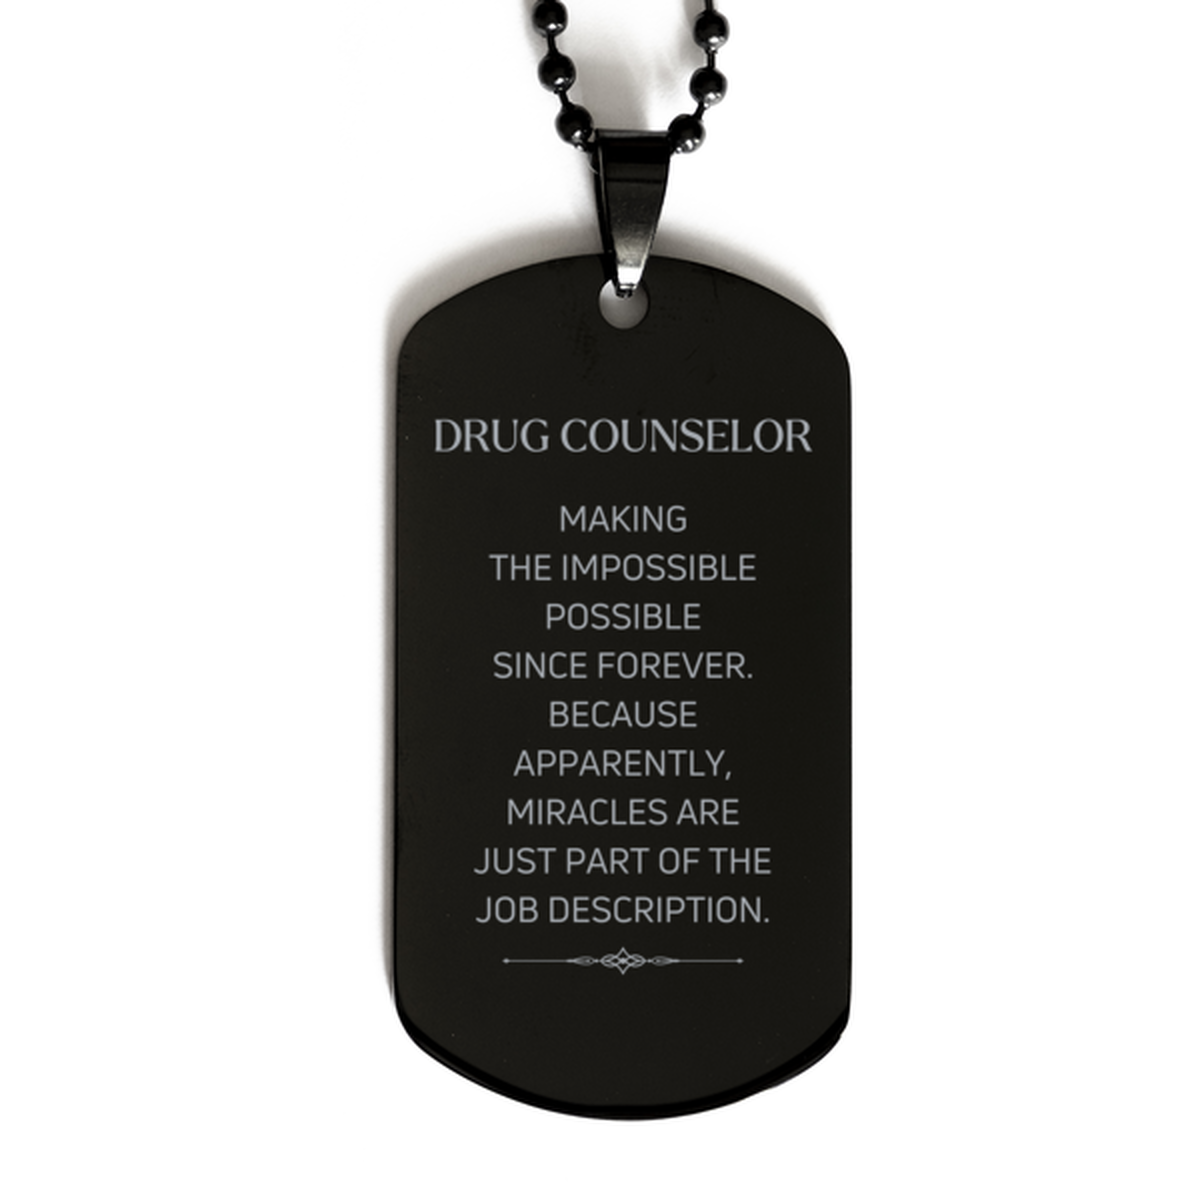 Funny Drug Counselor Gifts, Miracles are just part of the job description, Inspirational Birthday Black Dog Tag For Drug Counselor, Men, Women, Coworkers, Friends, Boss